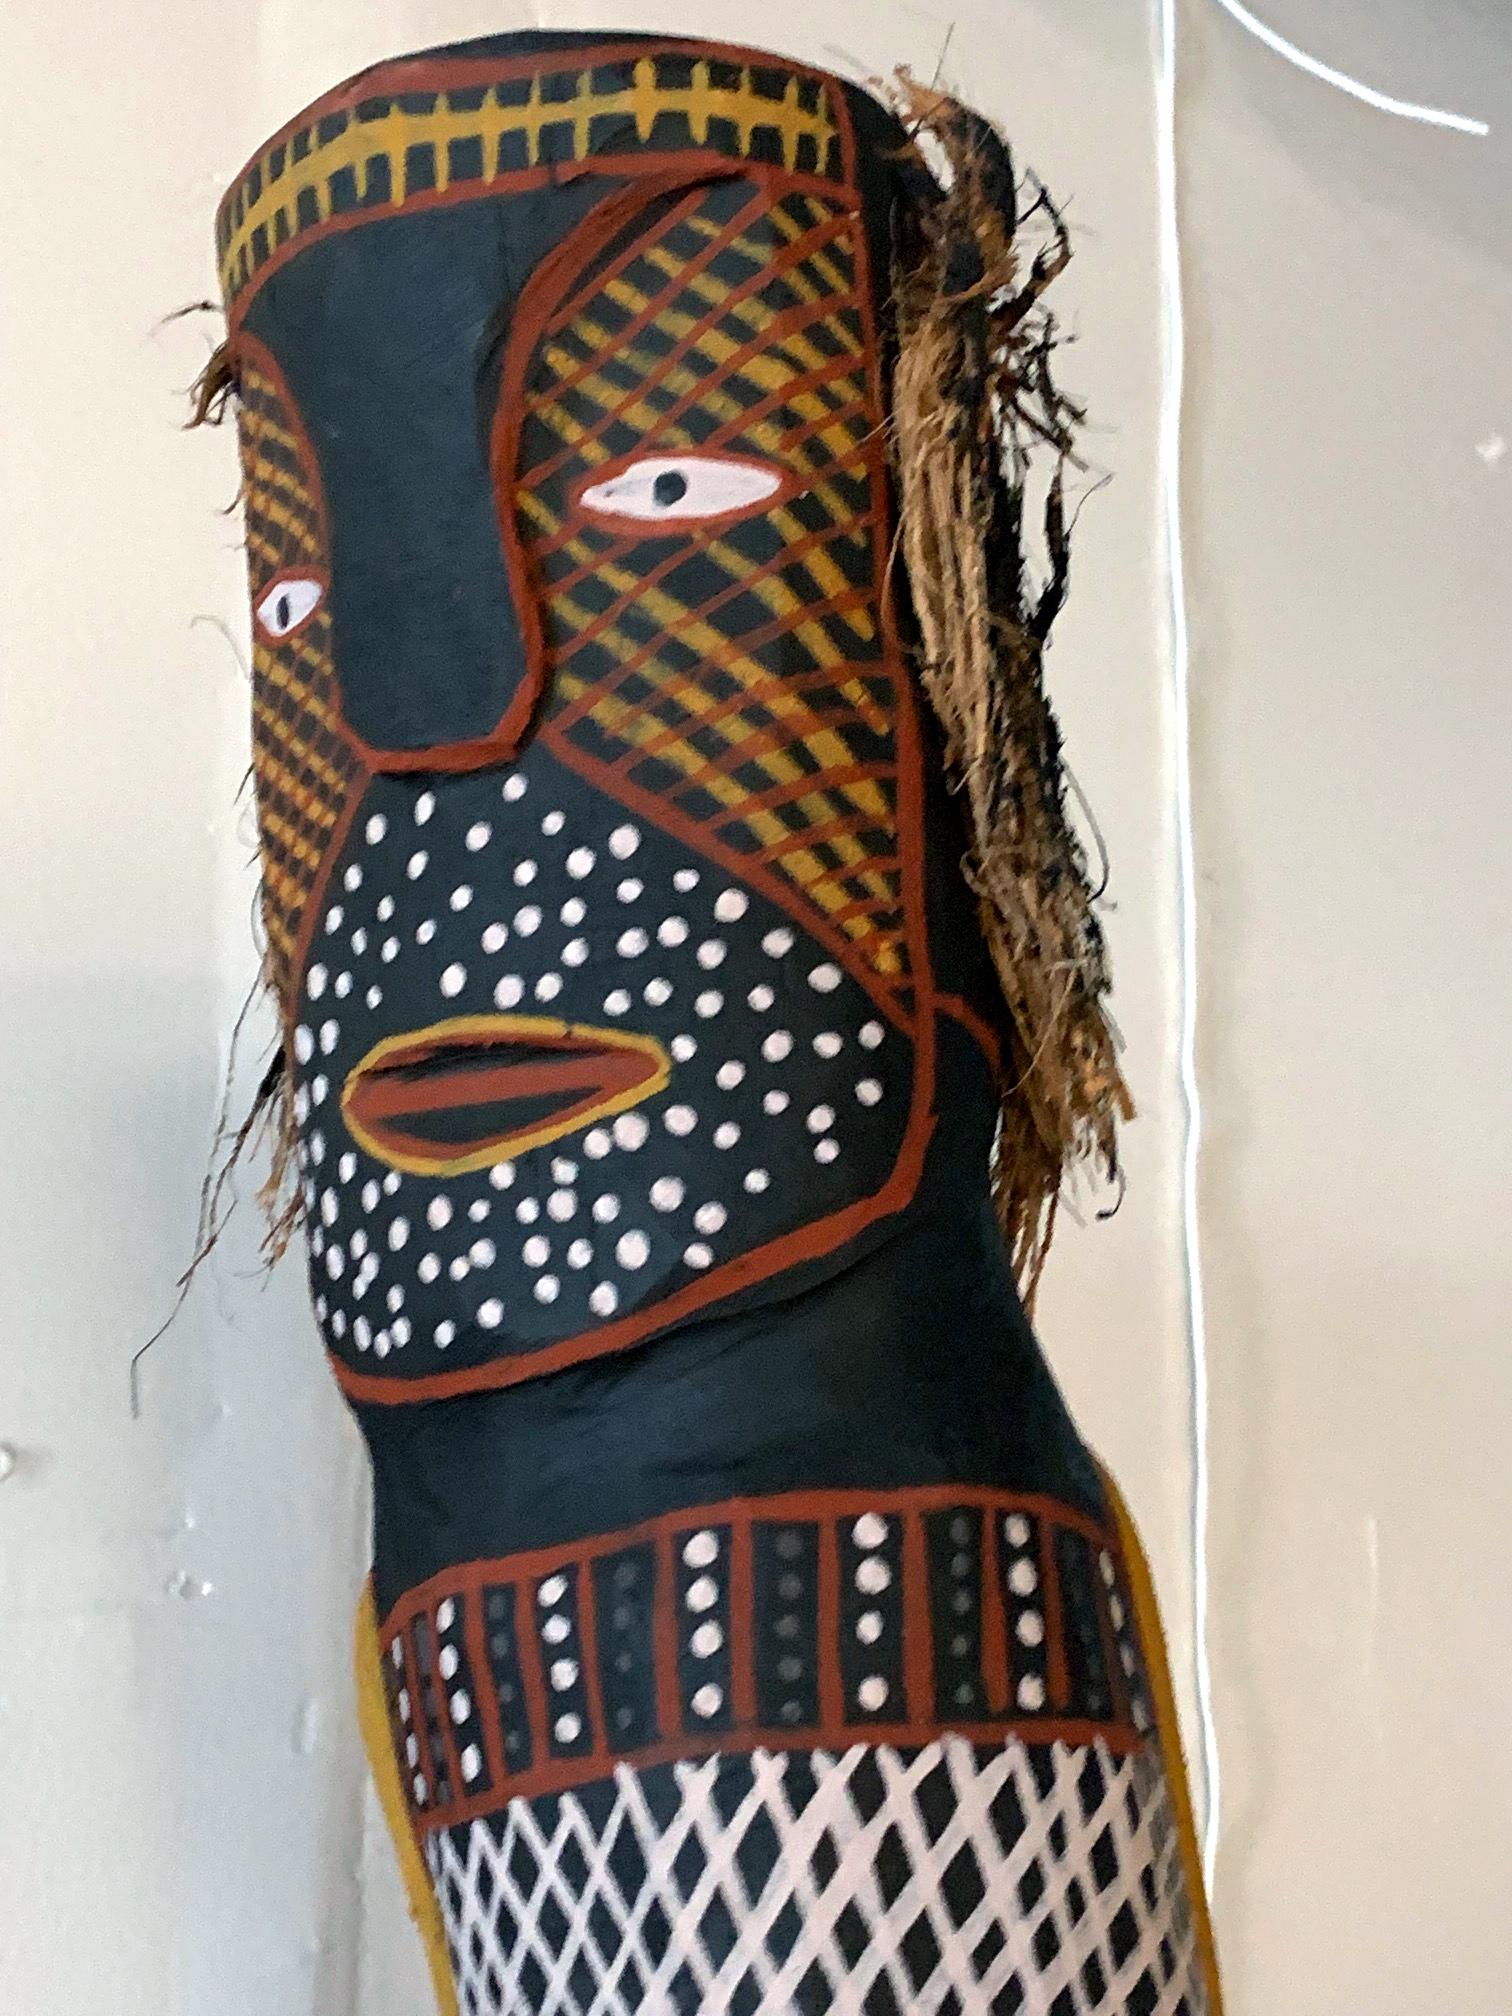 tiwi island carvings for sale